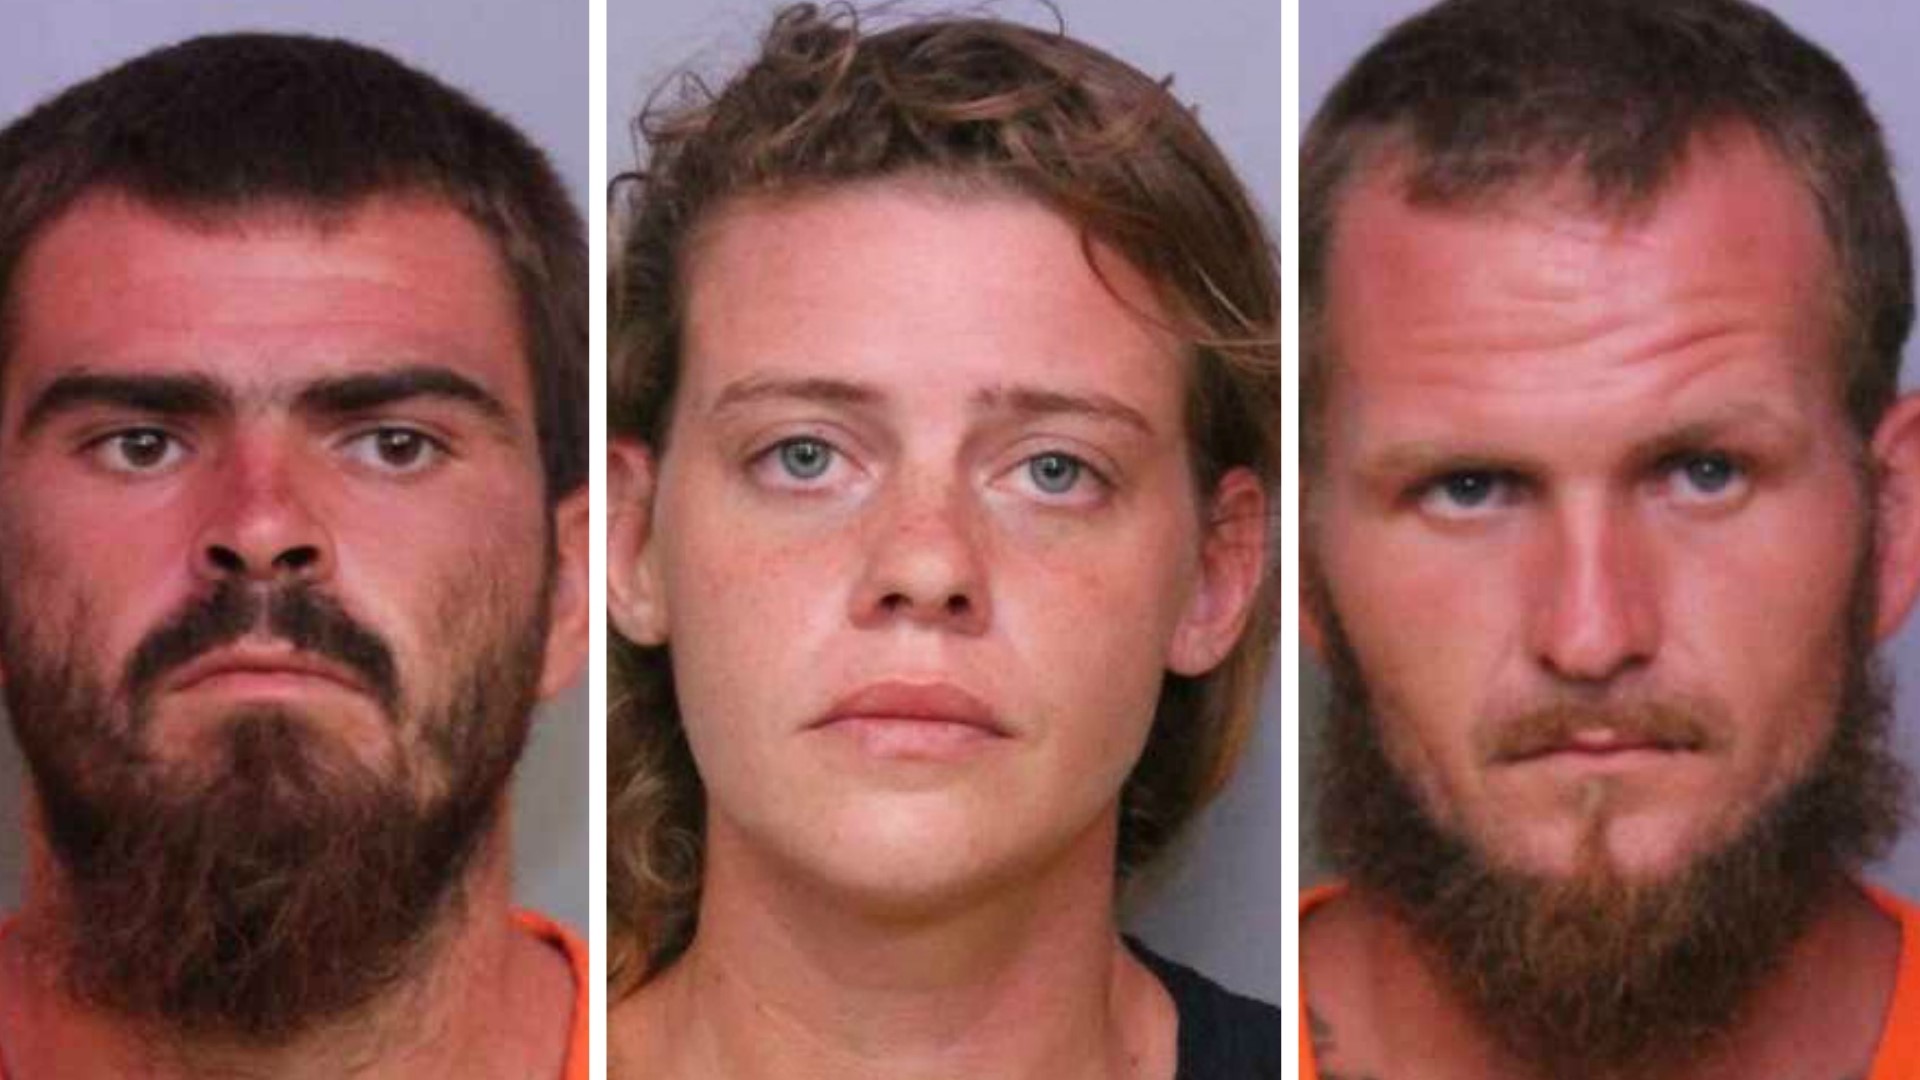 Two men and a woman were arrested in connection with the deaths of three men in Frostproof over the weekend.